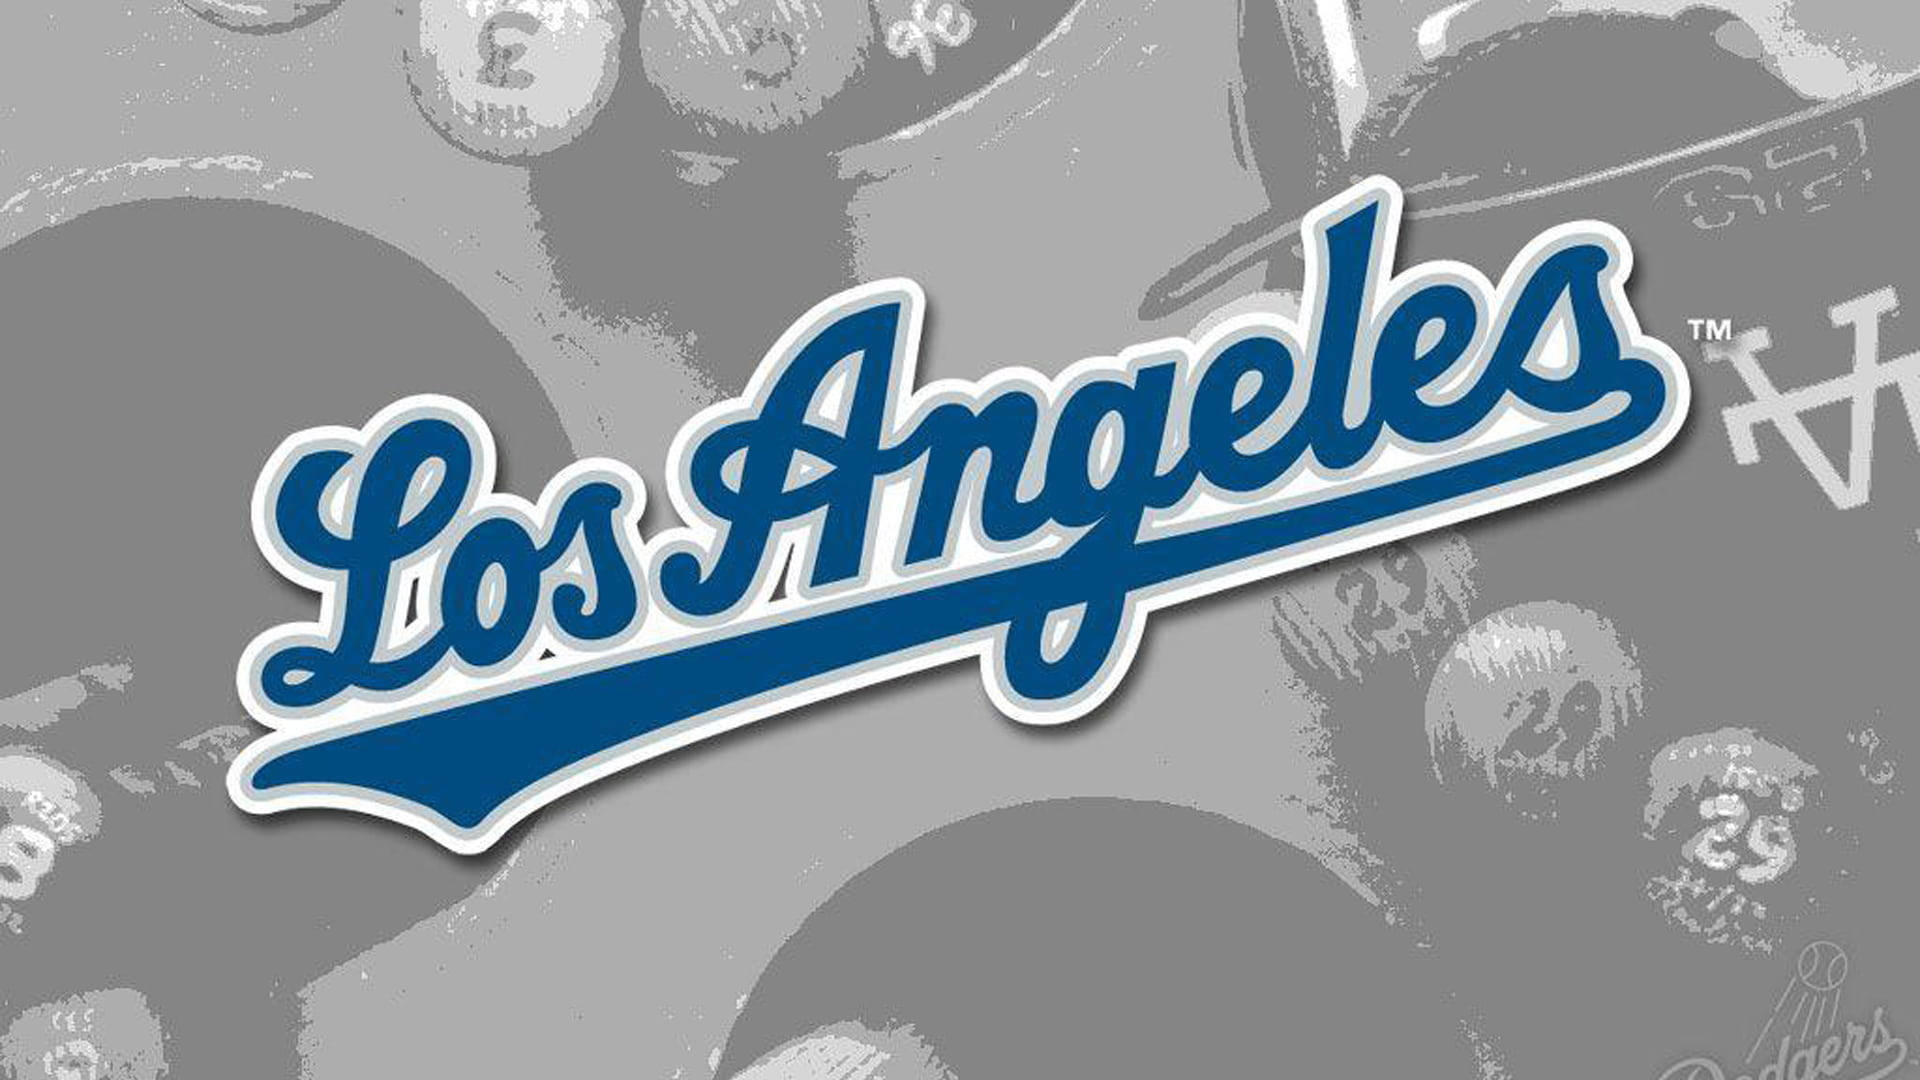 Los Angeles Dodgers Baseball Numbers Background